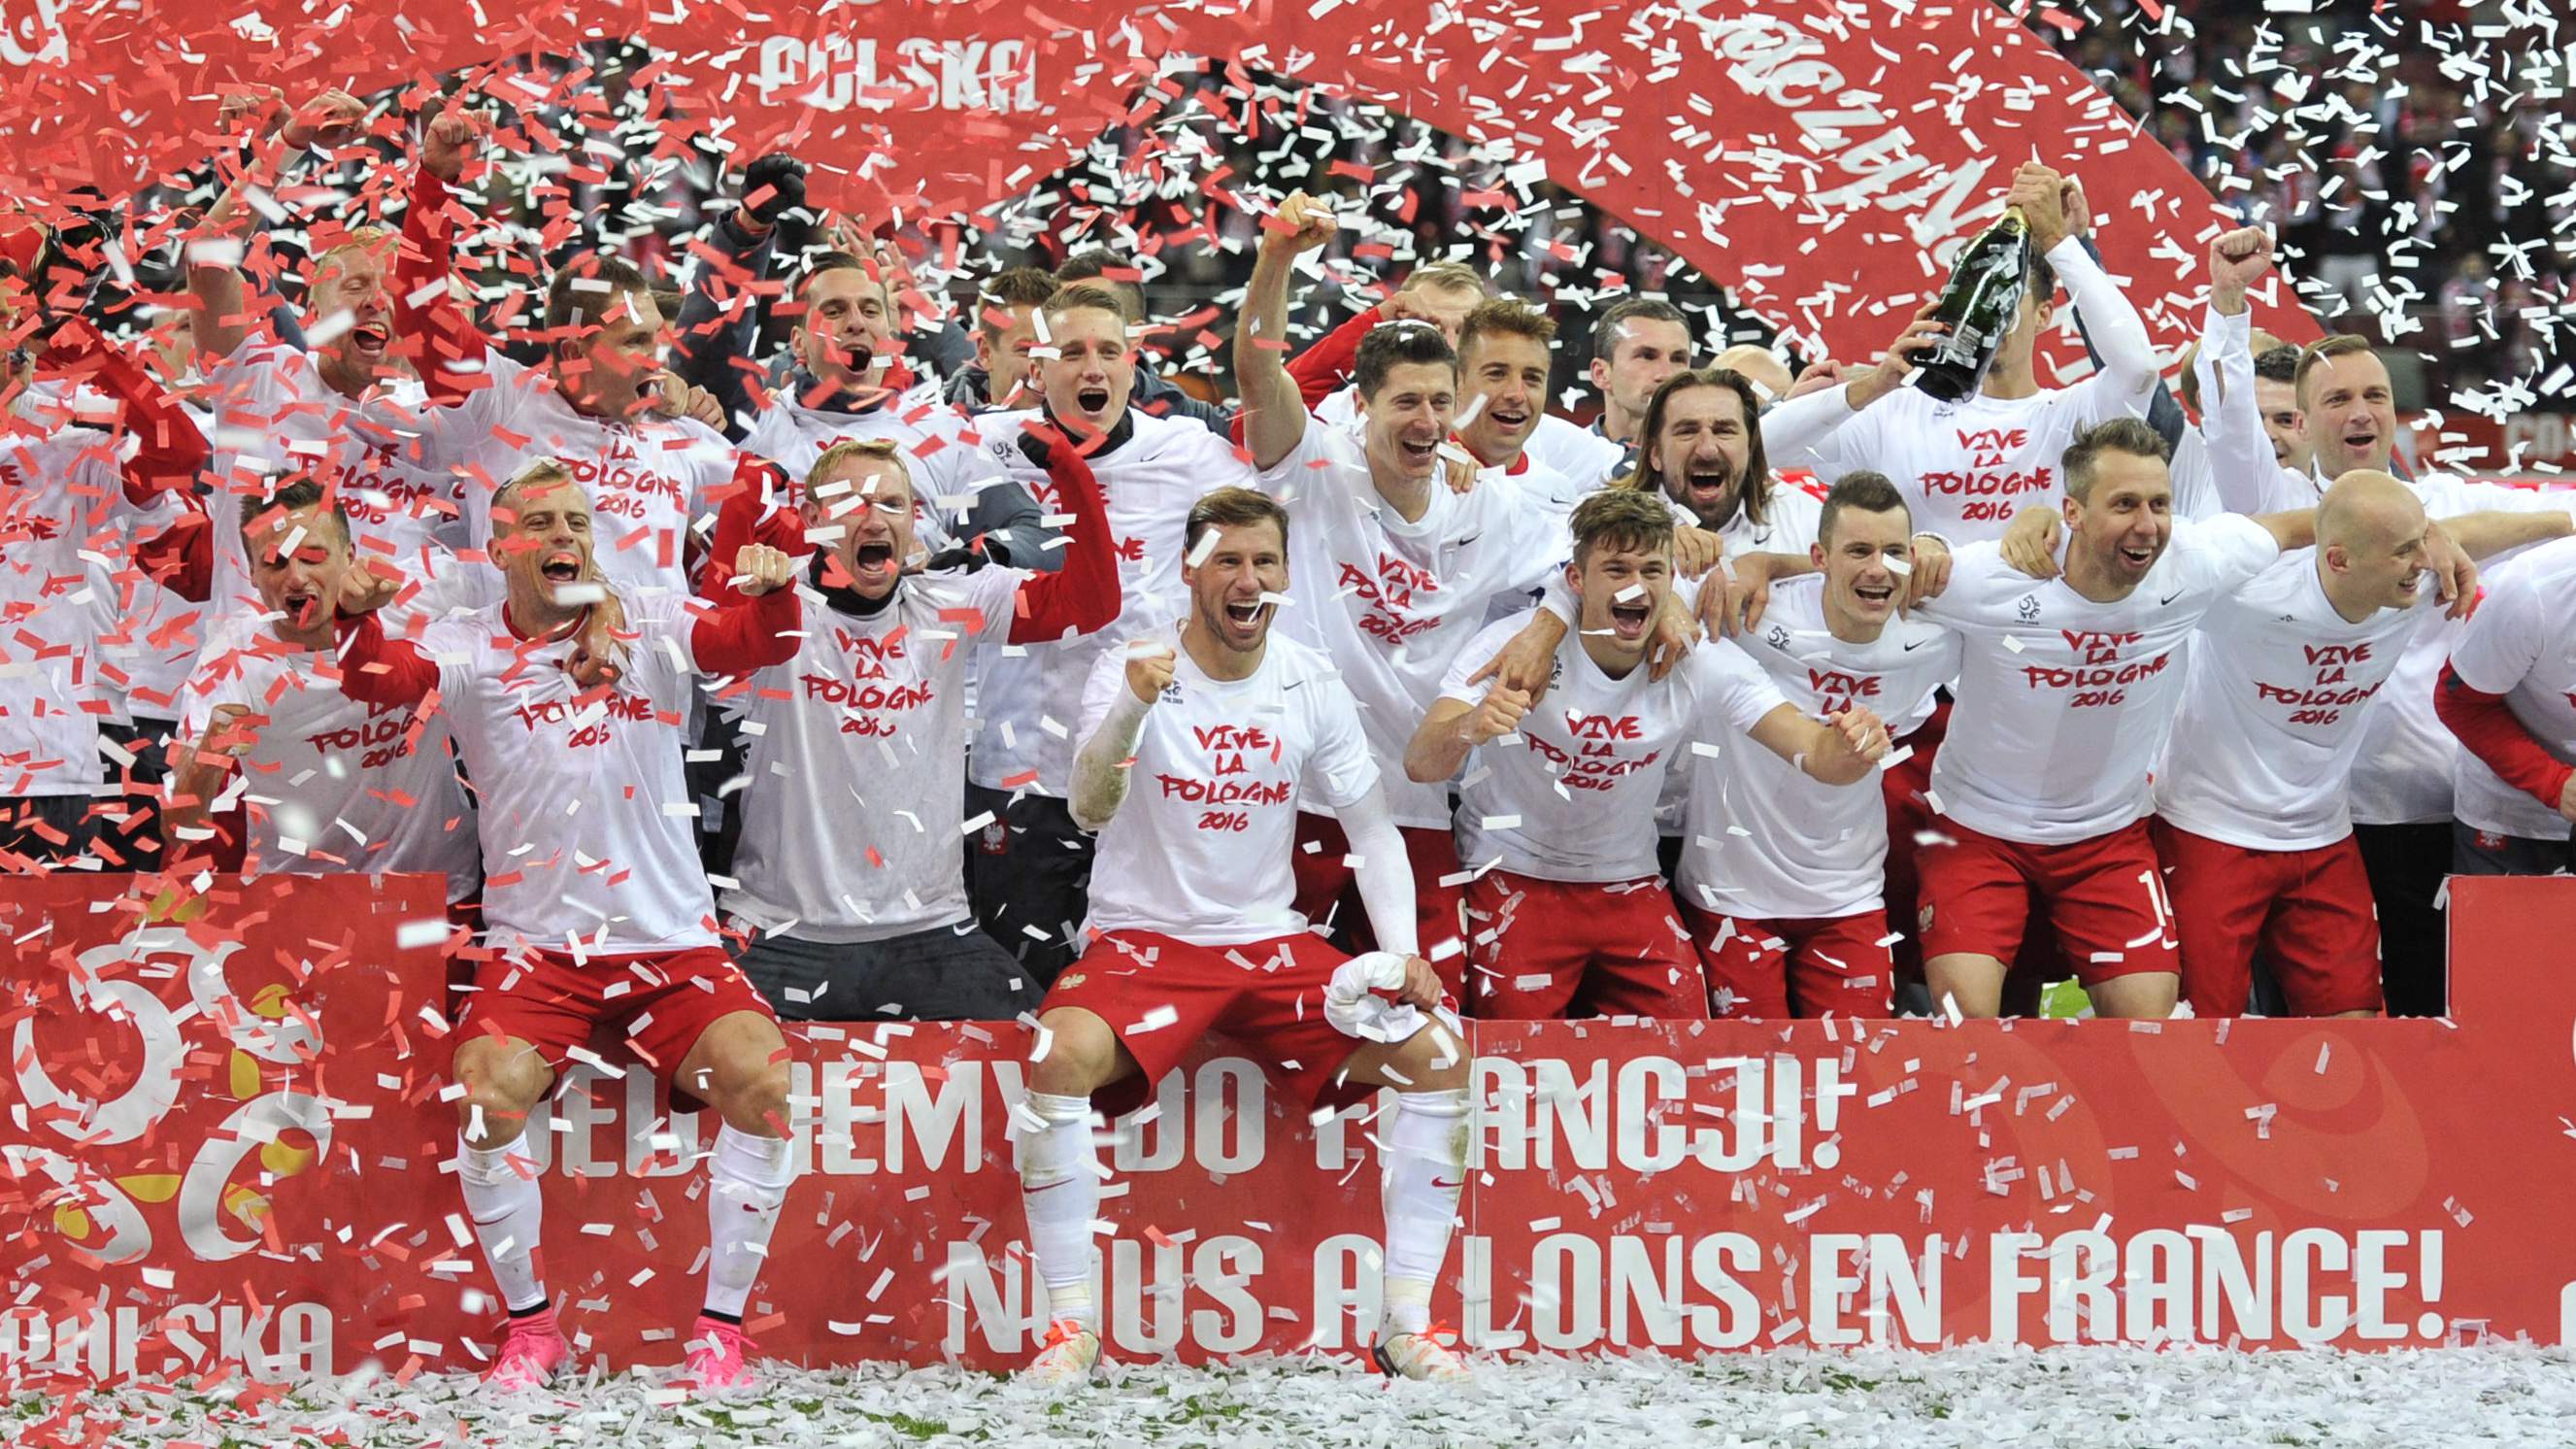 Football - Poland v Republic of Ireland - UEFA Euro 2016 Qualifying Group D - Stadion Narodowy, Warsaw, Poland - 11/10/15 Poland celebrate qualifying for UEFA Euro 2016 after the game  Action Images via Reuters / Adam Holt Livepic EDITORIAL USE ONLY.